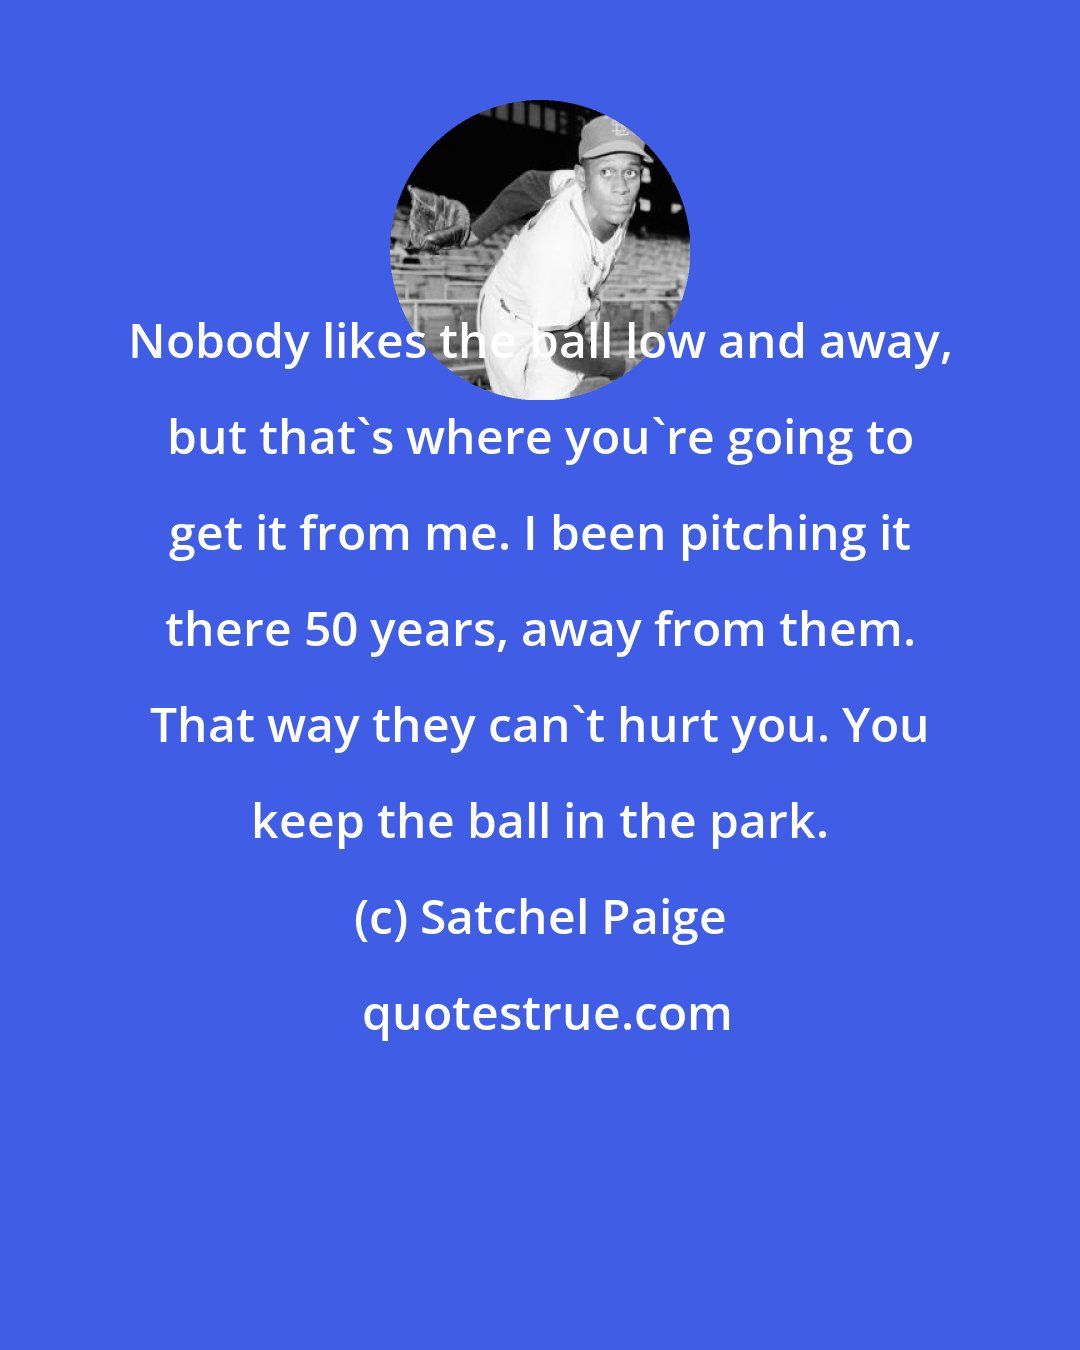 Satchel Paige: Nobody likes the ball low and away, but that's where you're going to get it from me. I been pitching it there 50 years, away from them. That way they can't hurt you. You keep the ball in the park.